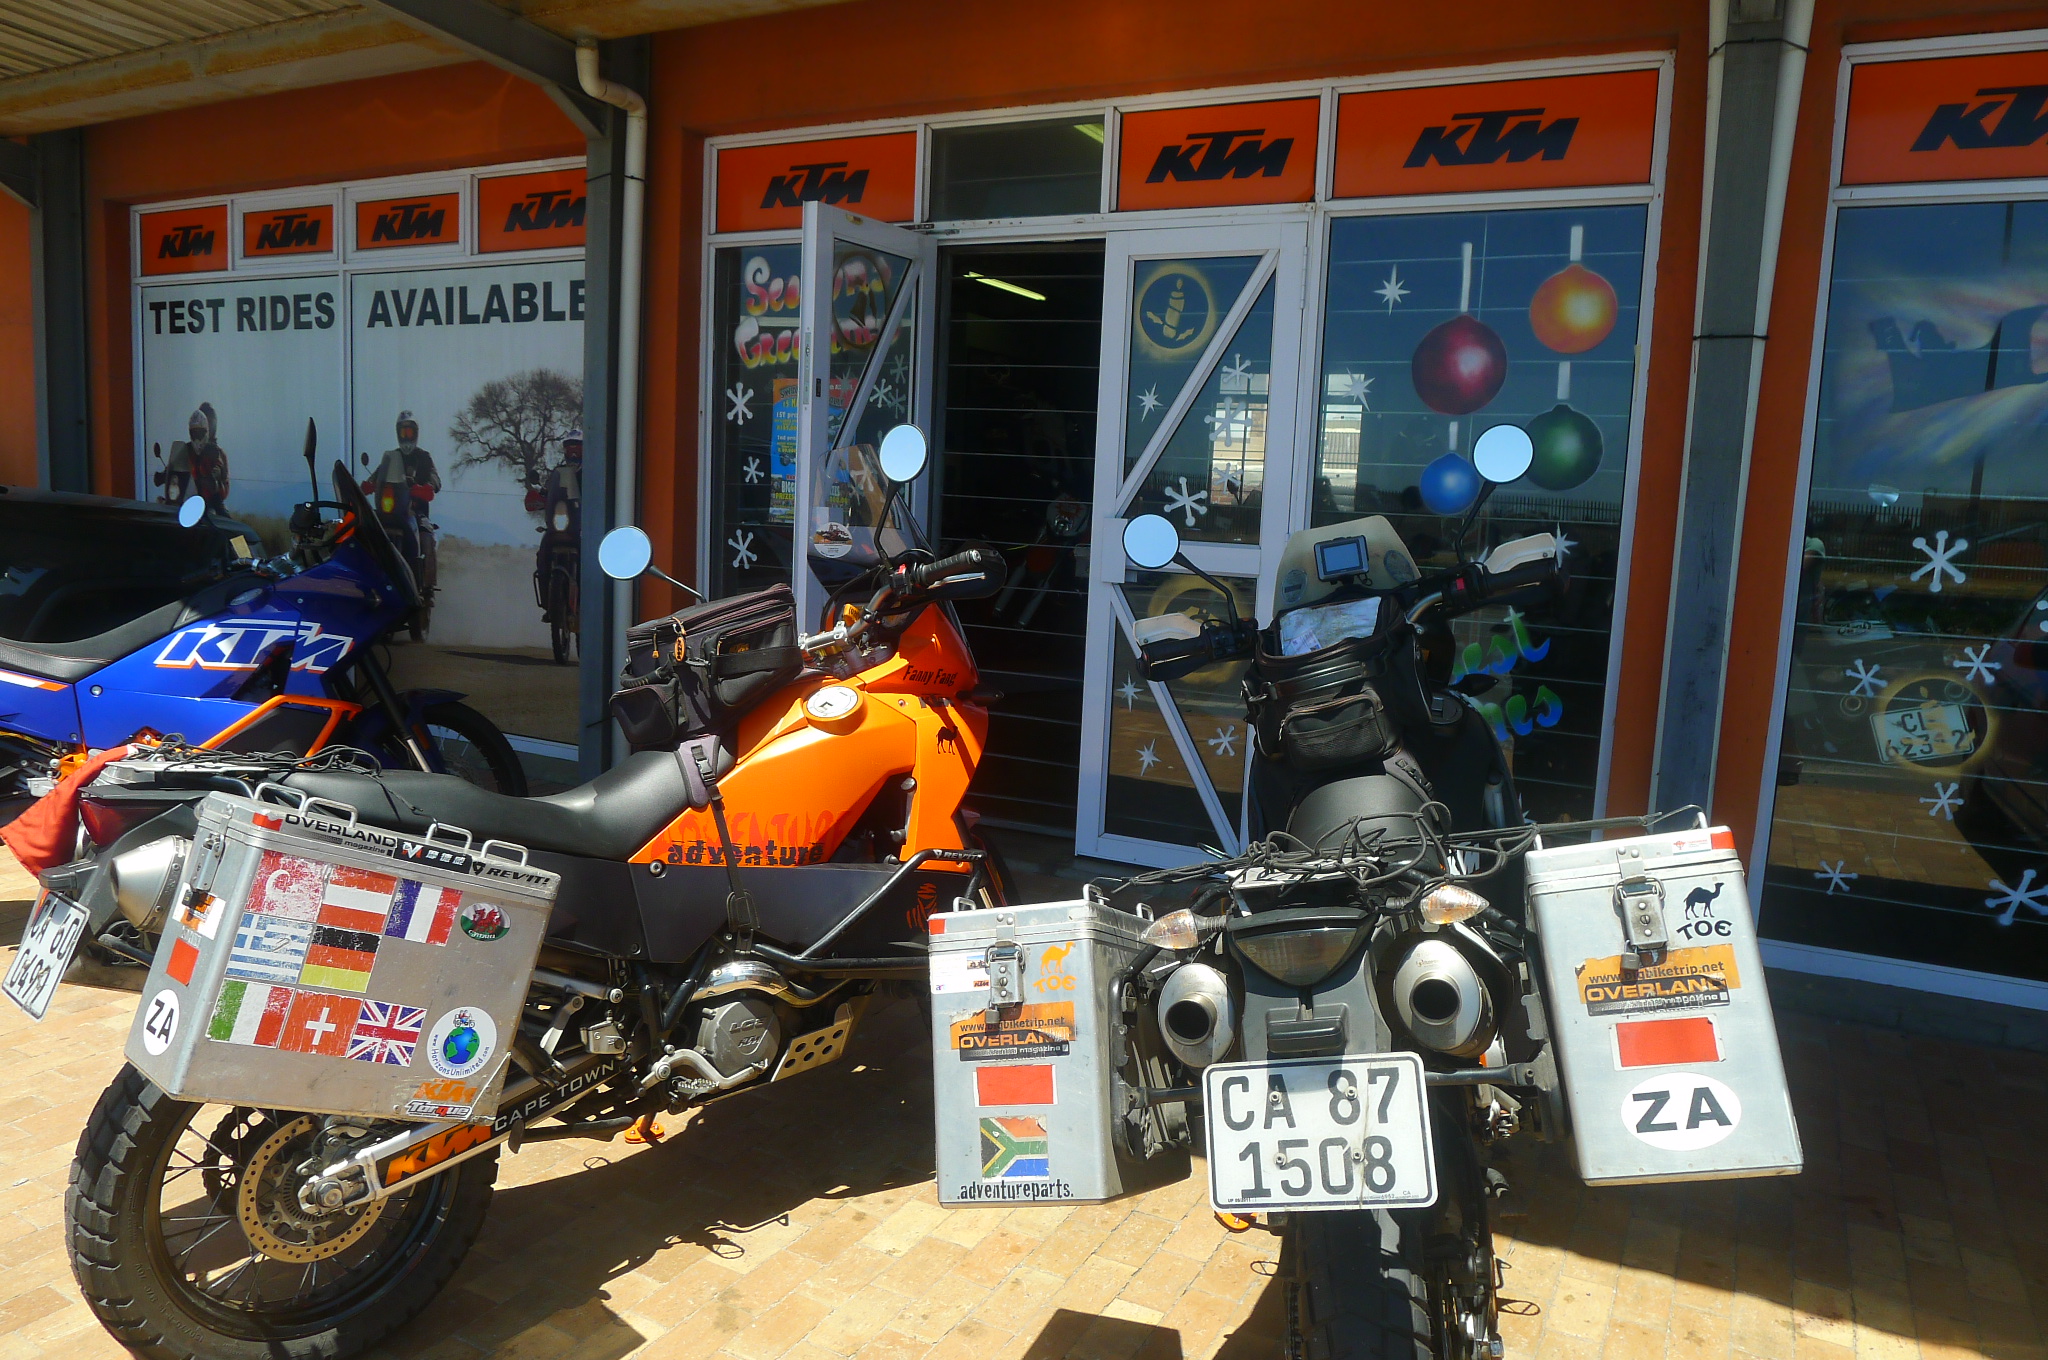 Both bikes back home at KTM Cape Town